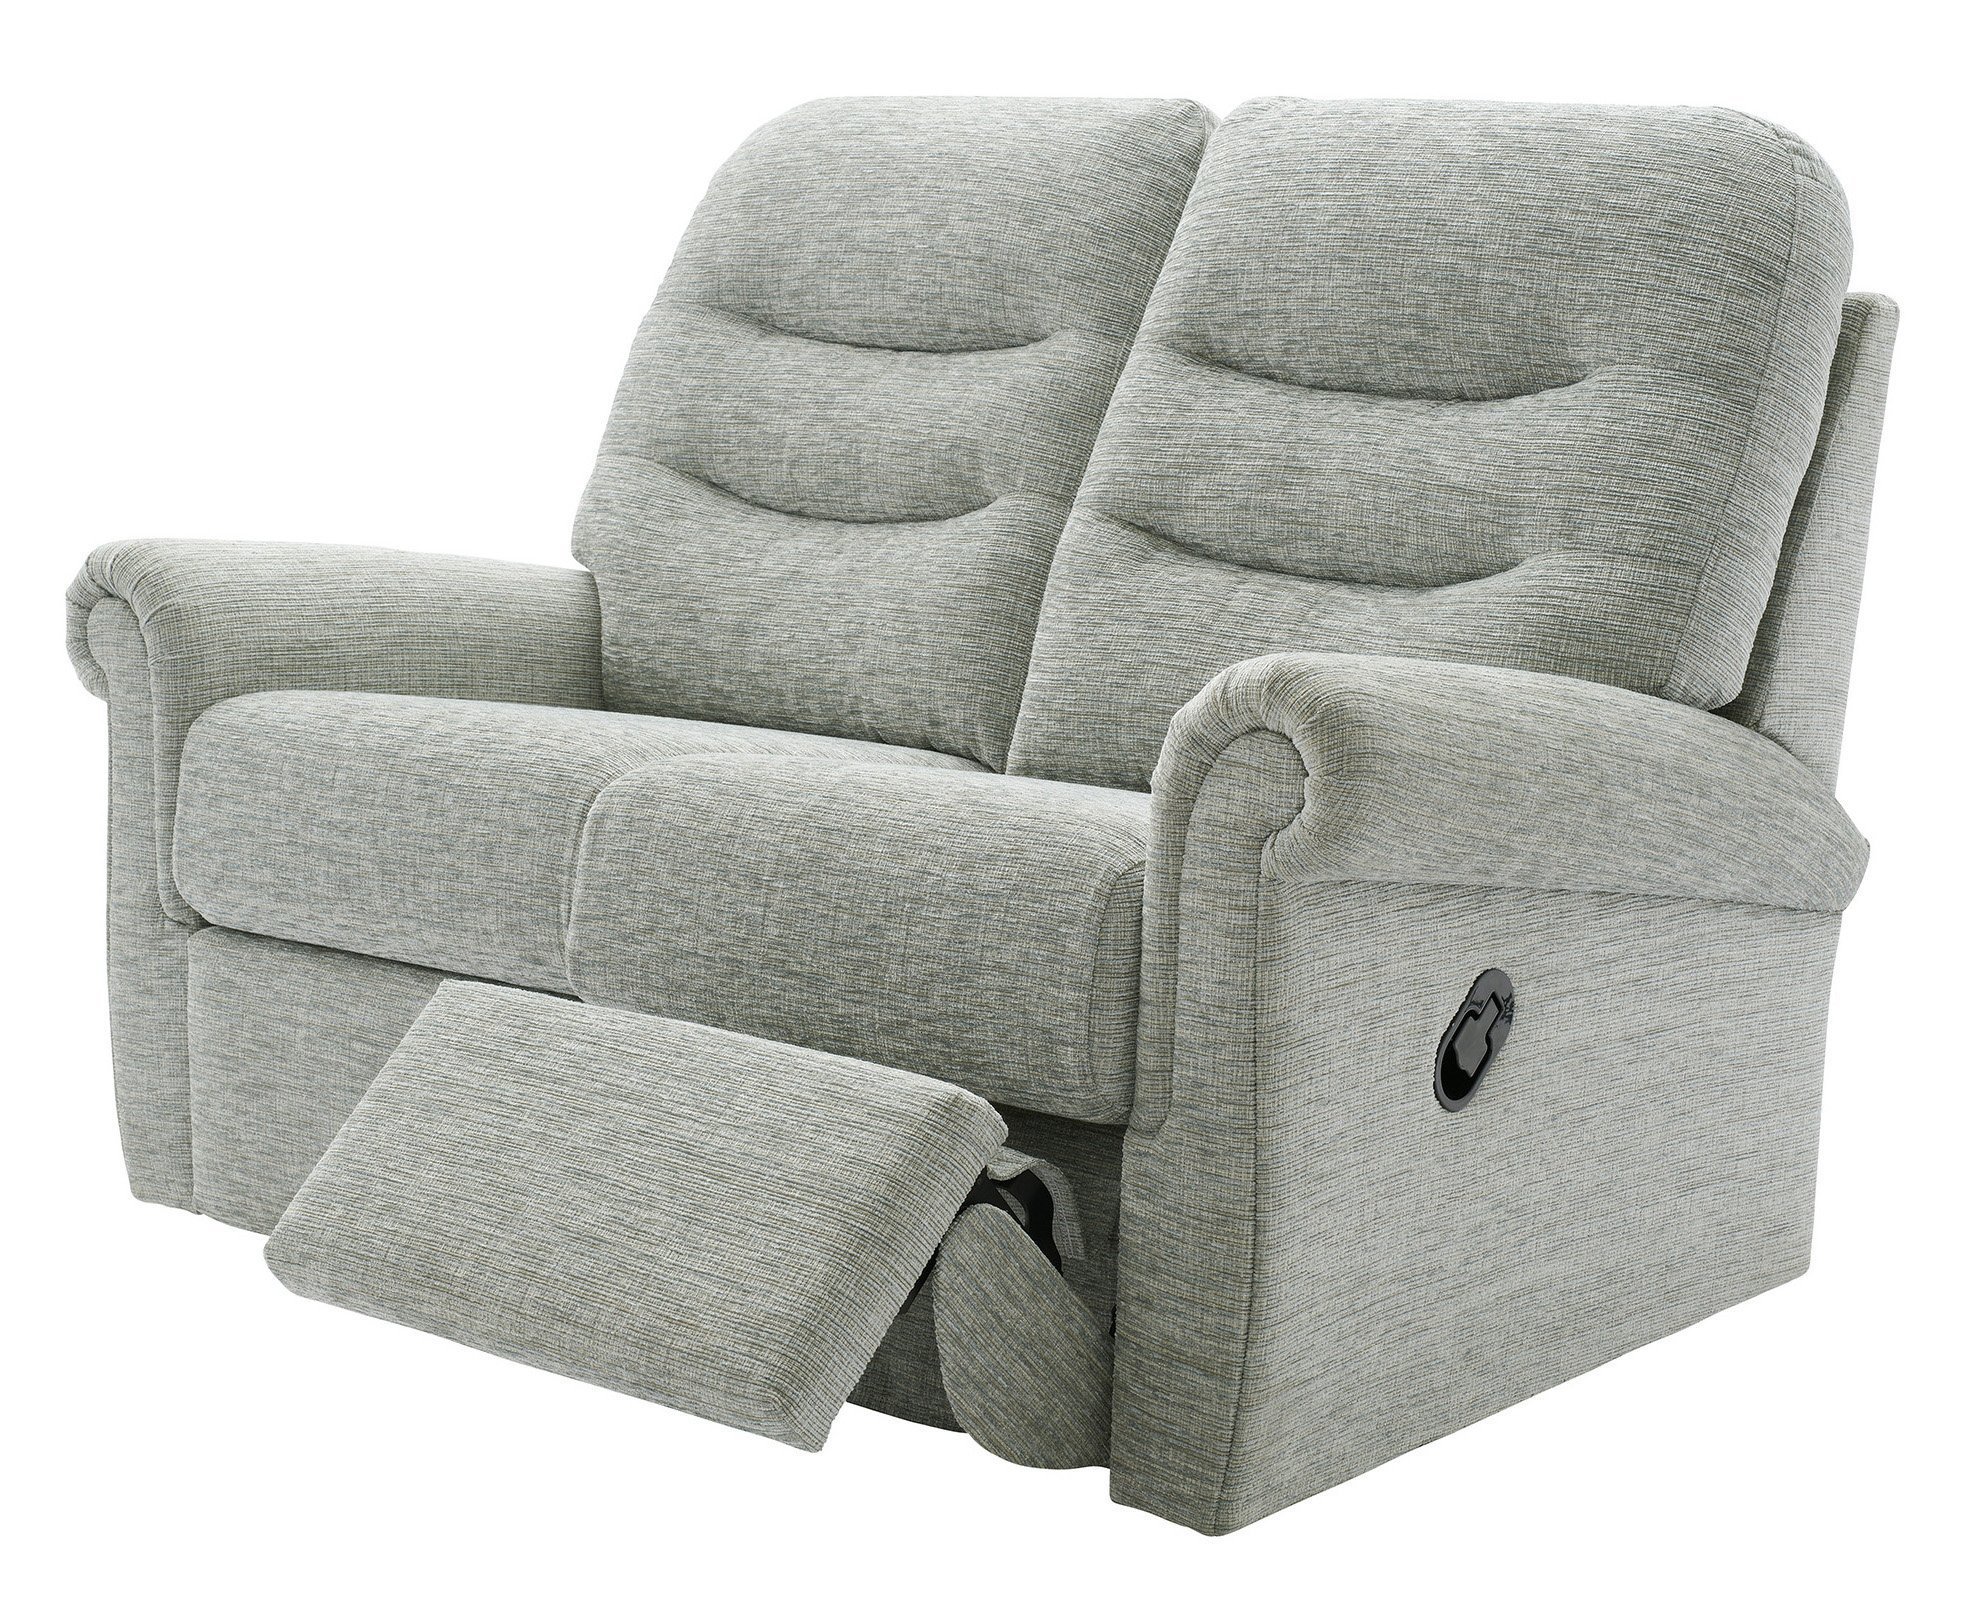 Two seater recliner